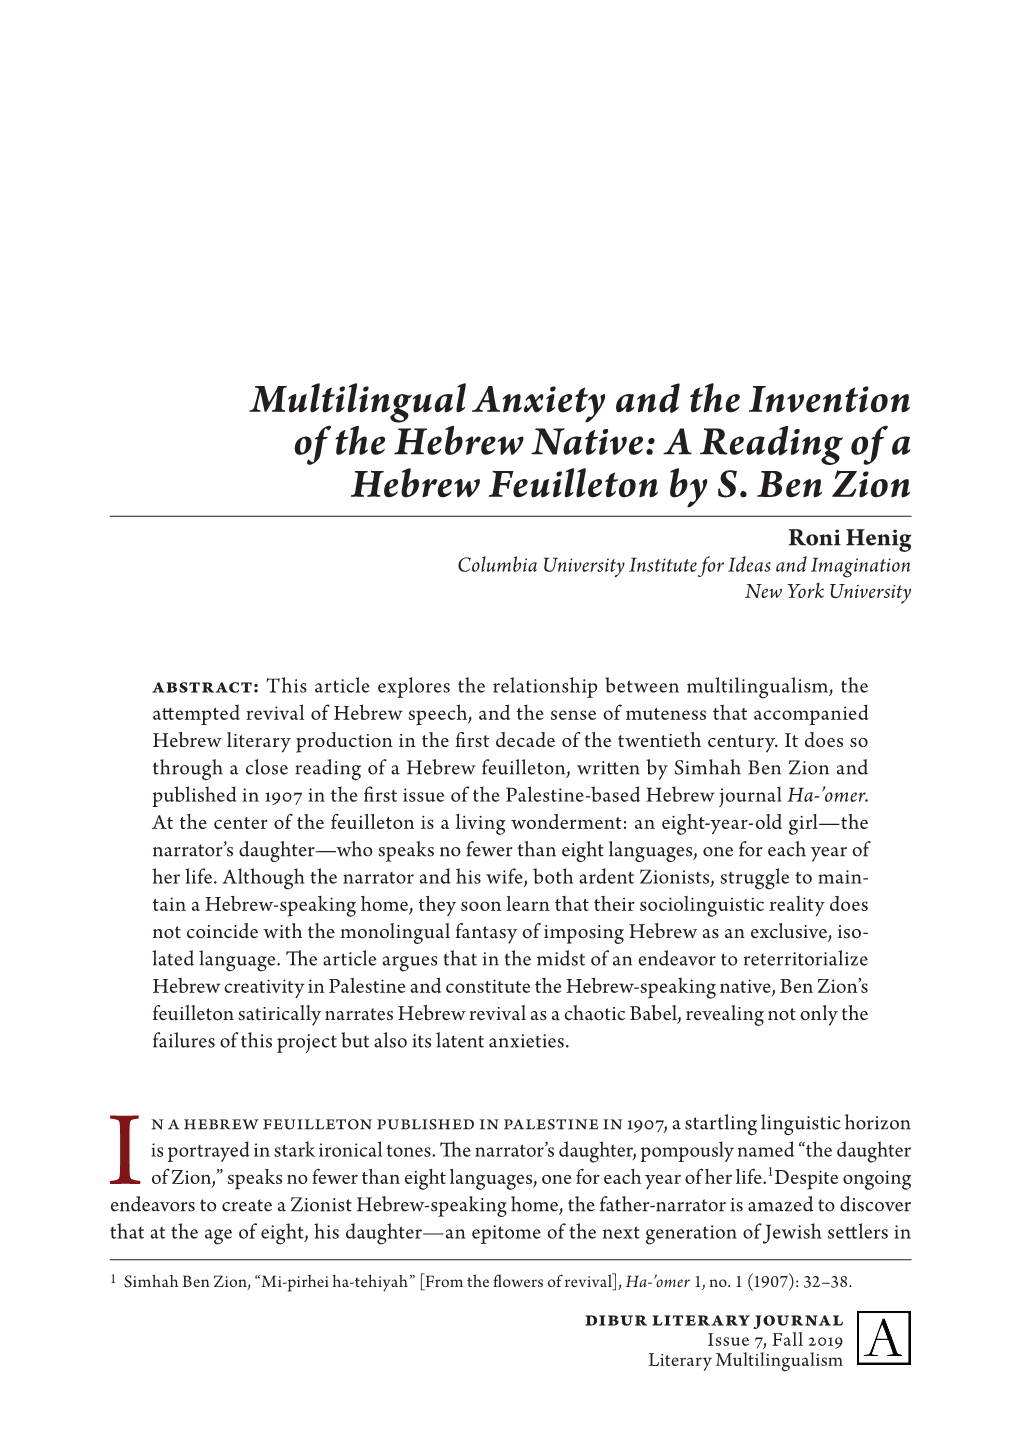 Multilingual Anxiety and the Invention of the Hebrew Native: a Reading of a Hebrew Feuilleton by S